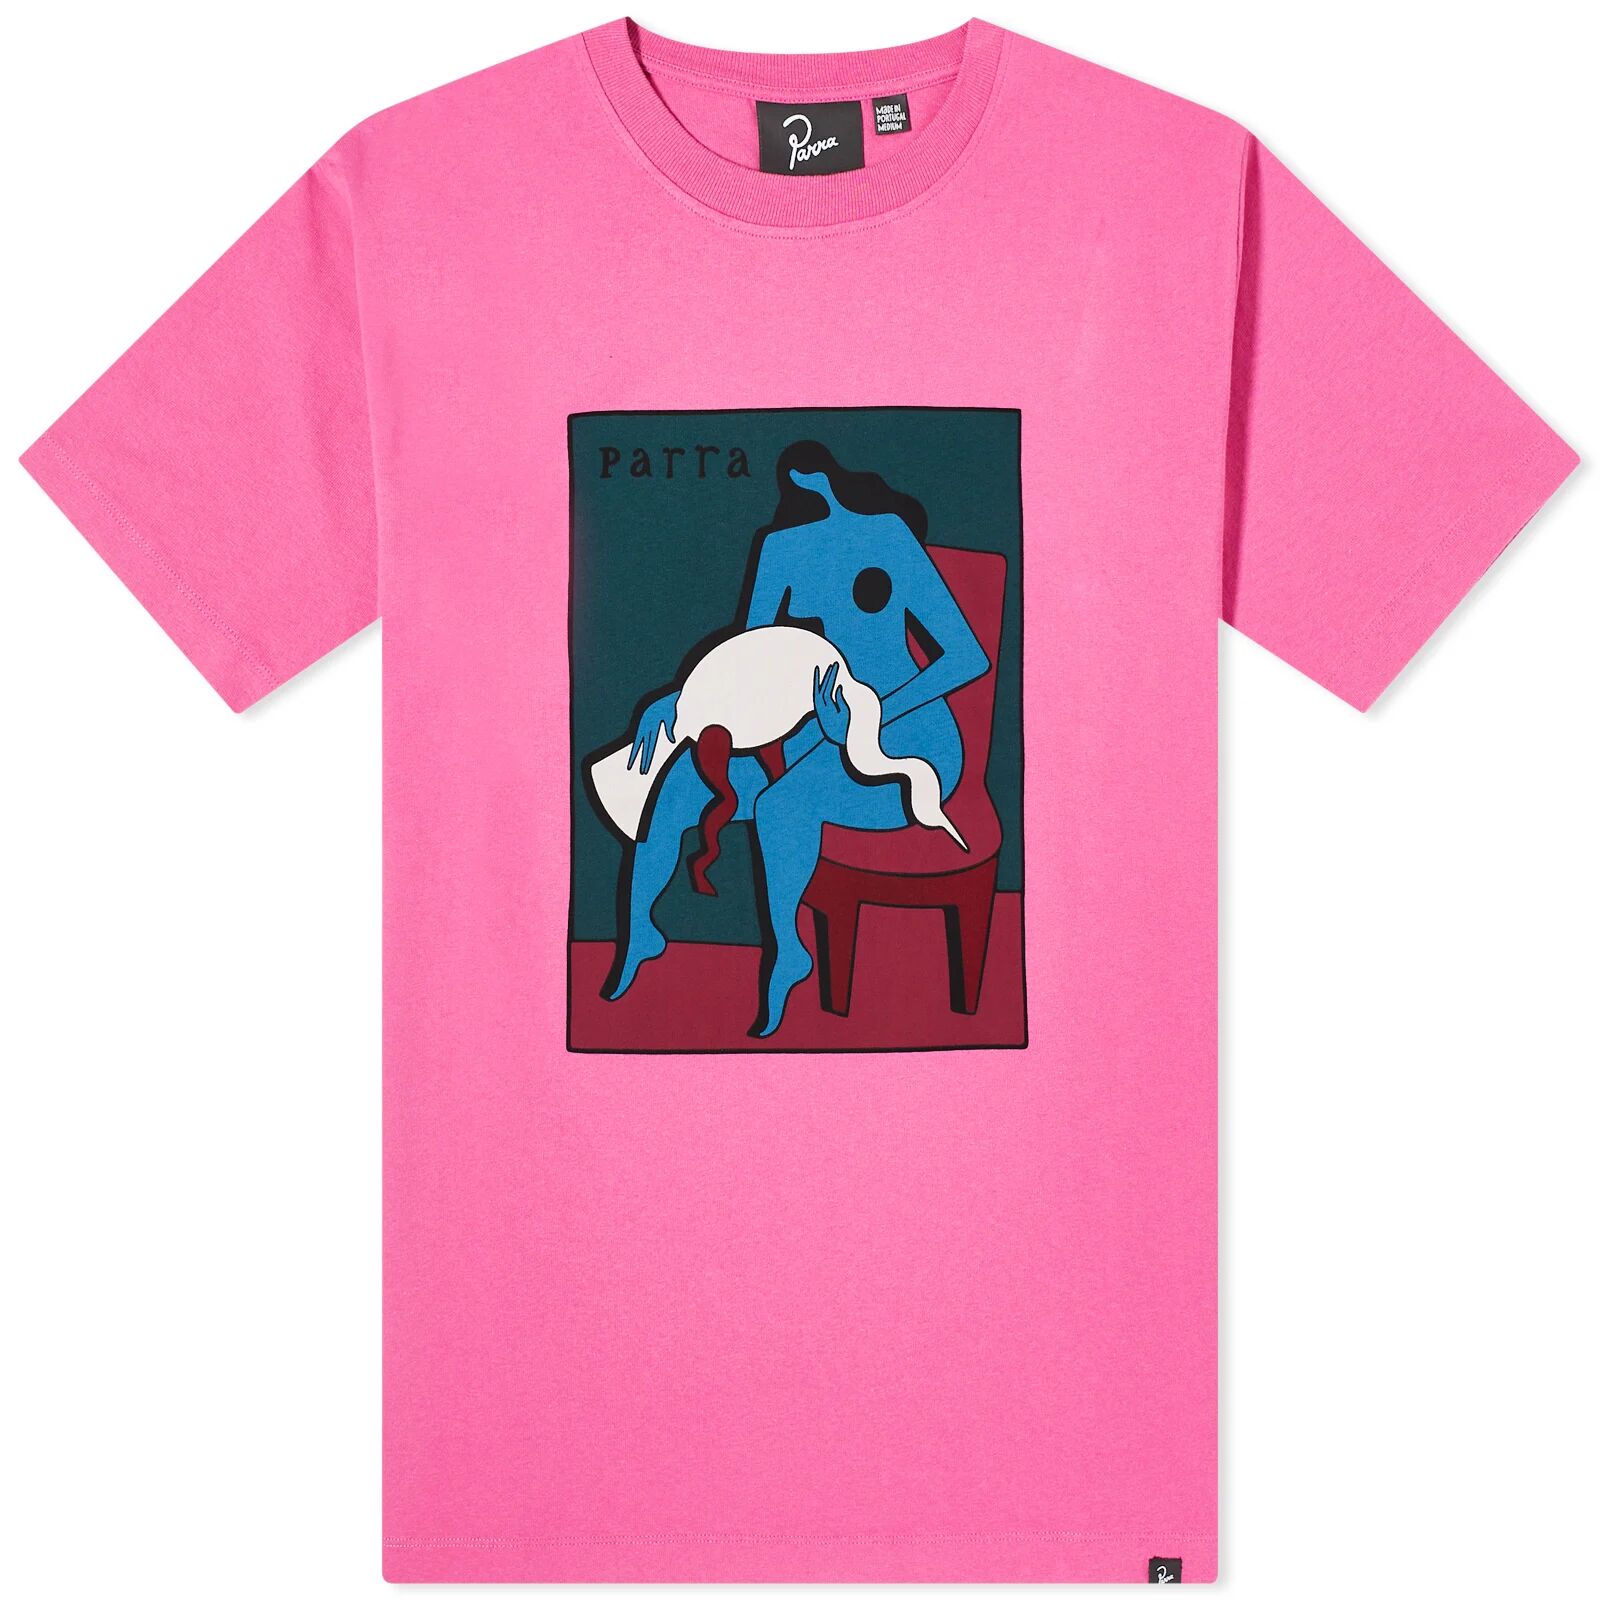 By Parra Men's My Dear Swan T-Shirt in Pink, Size X-Small